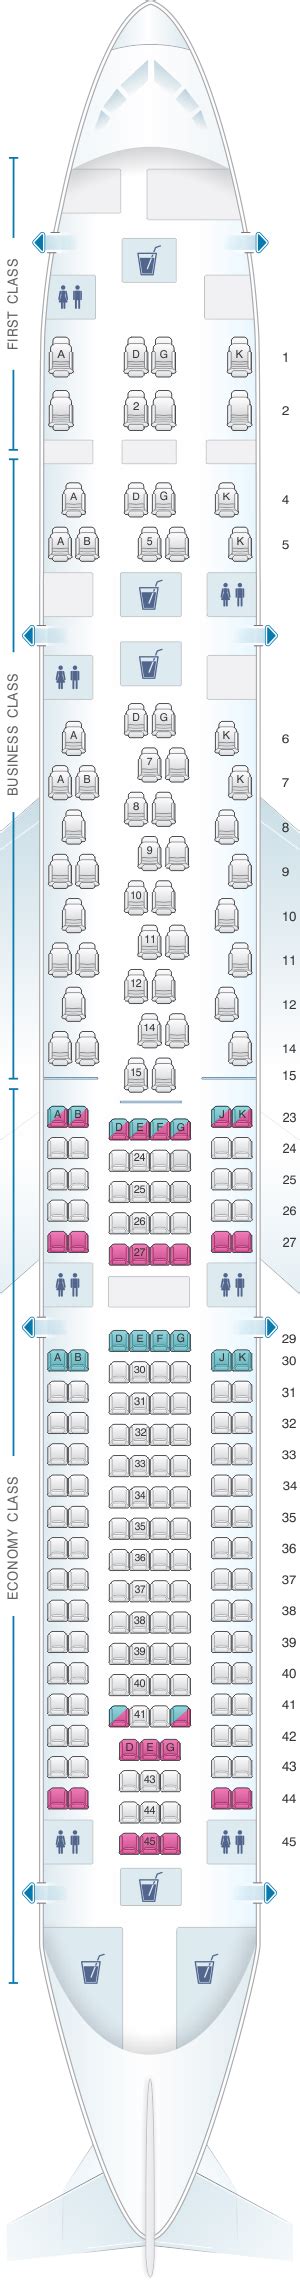 Seat Map Swiss Airbus A340 300 Seatmaestro